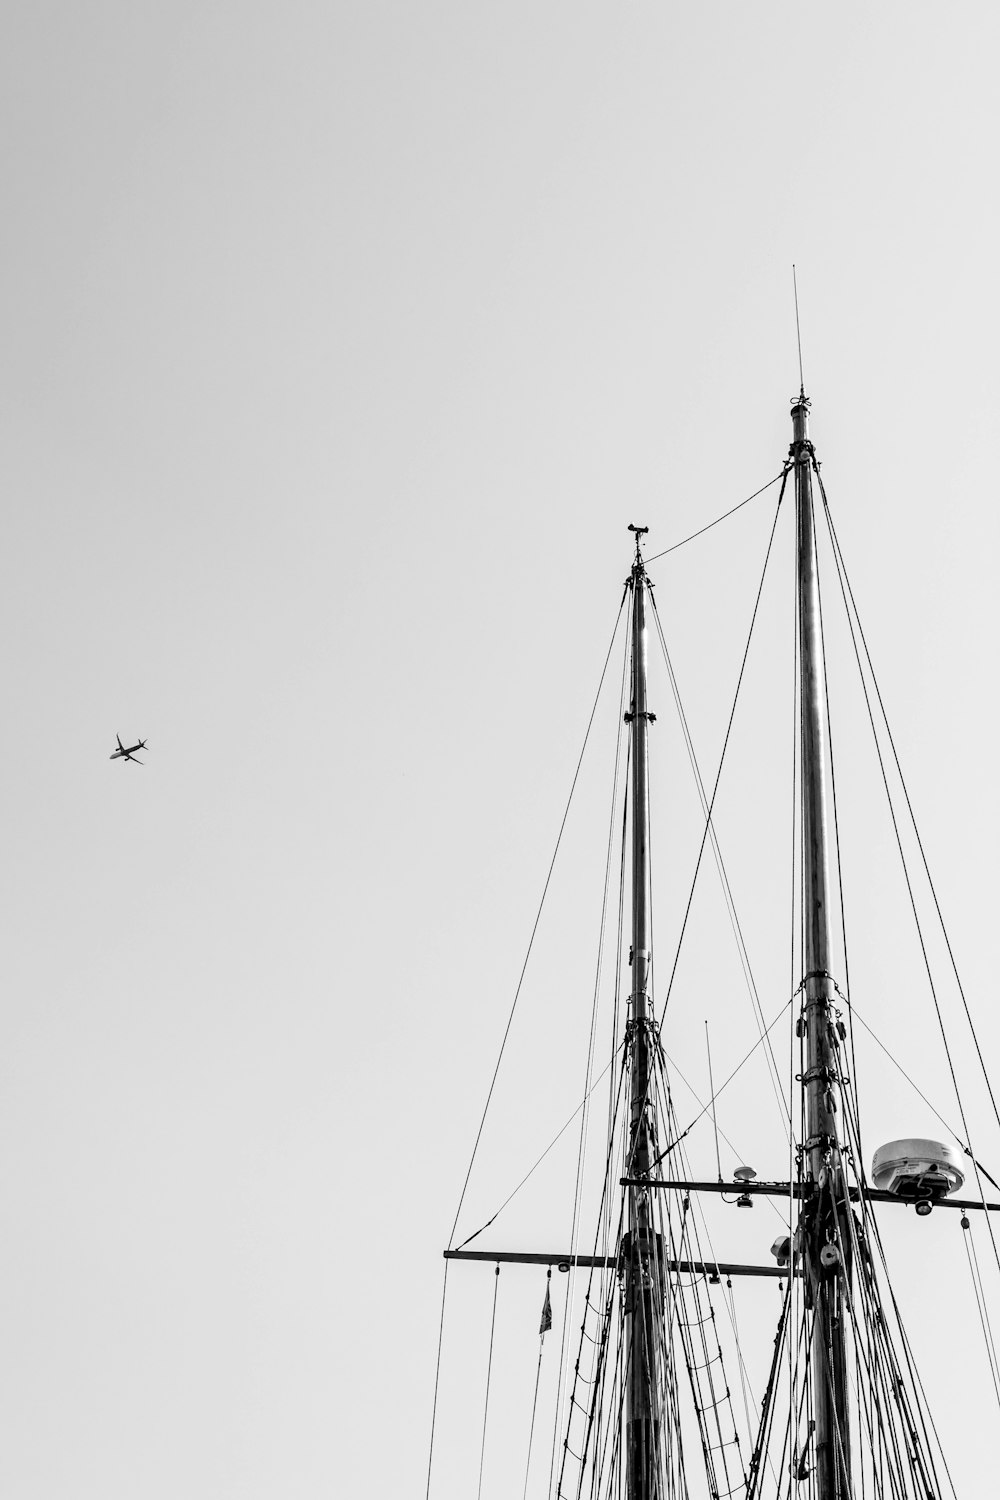 a plane flying over a ship in the sky